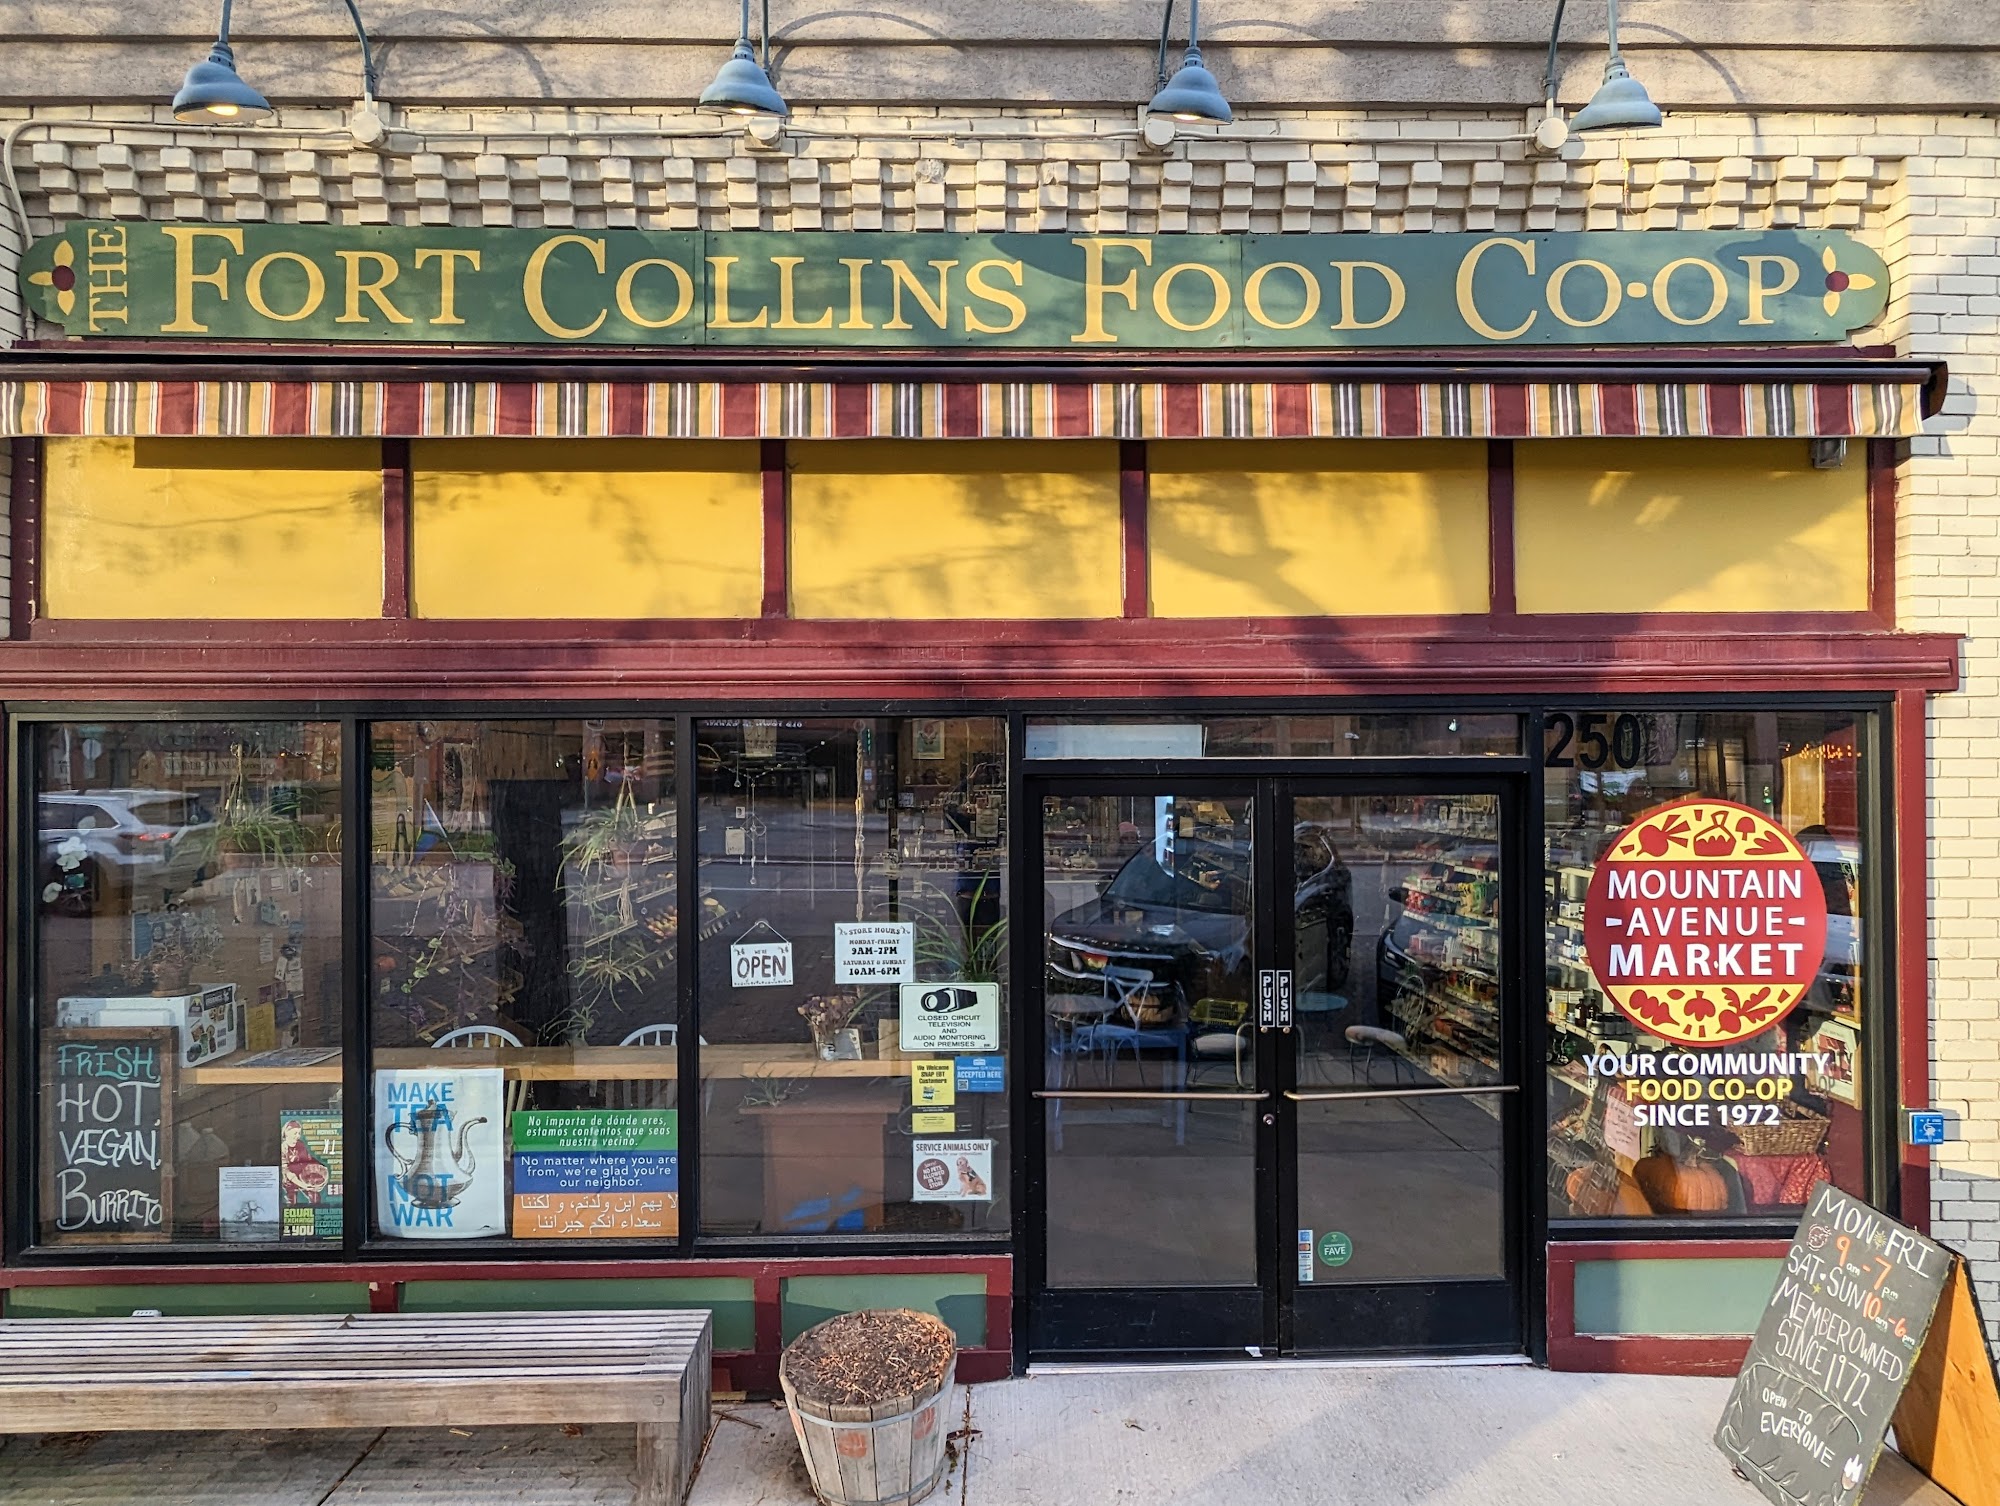 Fort Collins Food Co-Op (Mountain Avenue Market Catering, Kitchen, Deli & Restaurant Supply)